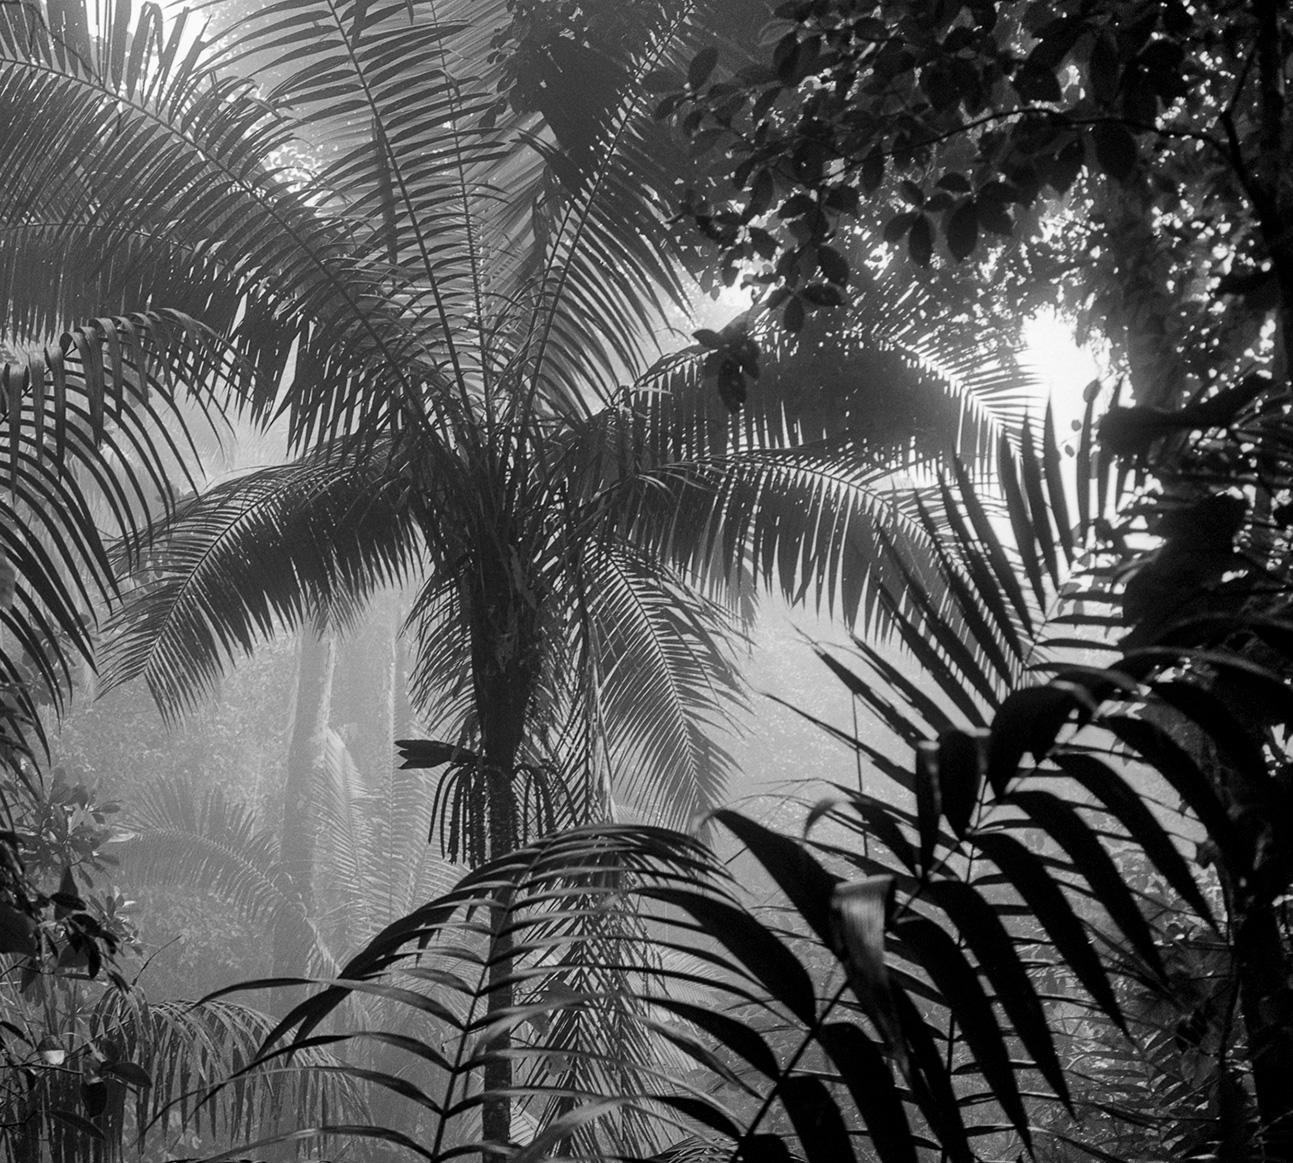 Bosque Húmedo Tropical II Nuqui, 2021 by Miguel Winograd 
From the Series Bosques
Pigment Prints
Size: 36 in H x 43 in W 
Edition of 5 + 2AP

Black and white Edition
Unframed 

____________________________

Miguel Winograd is a Colombian